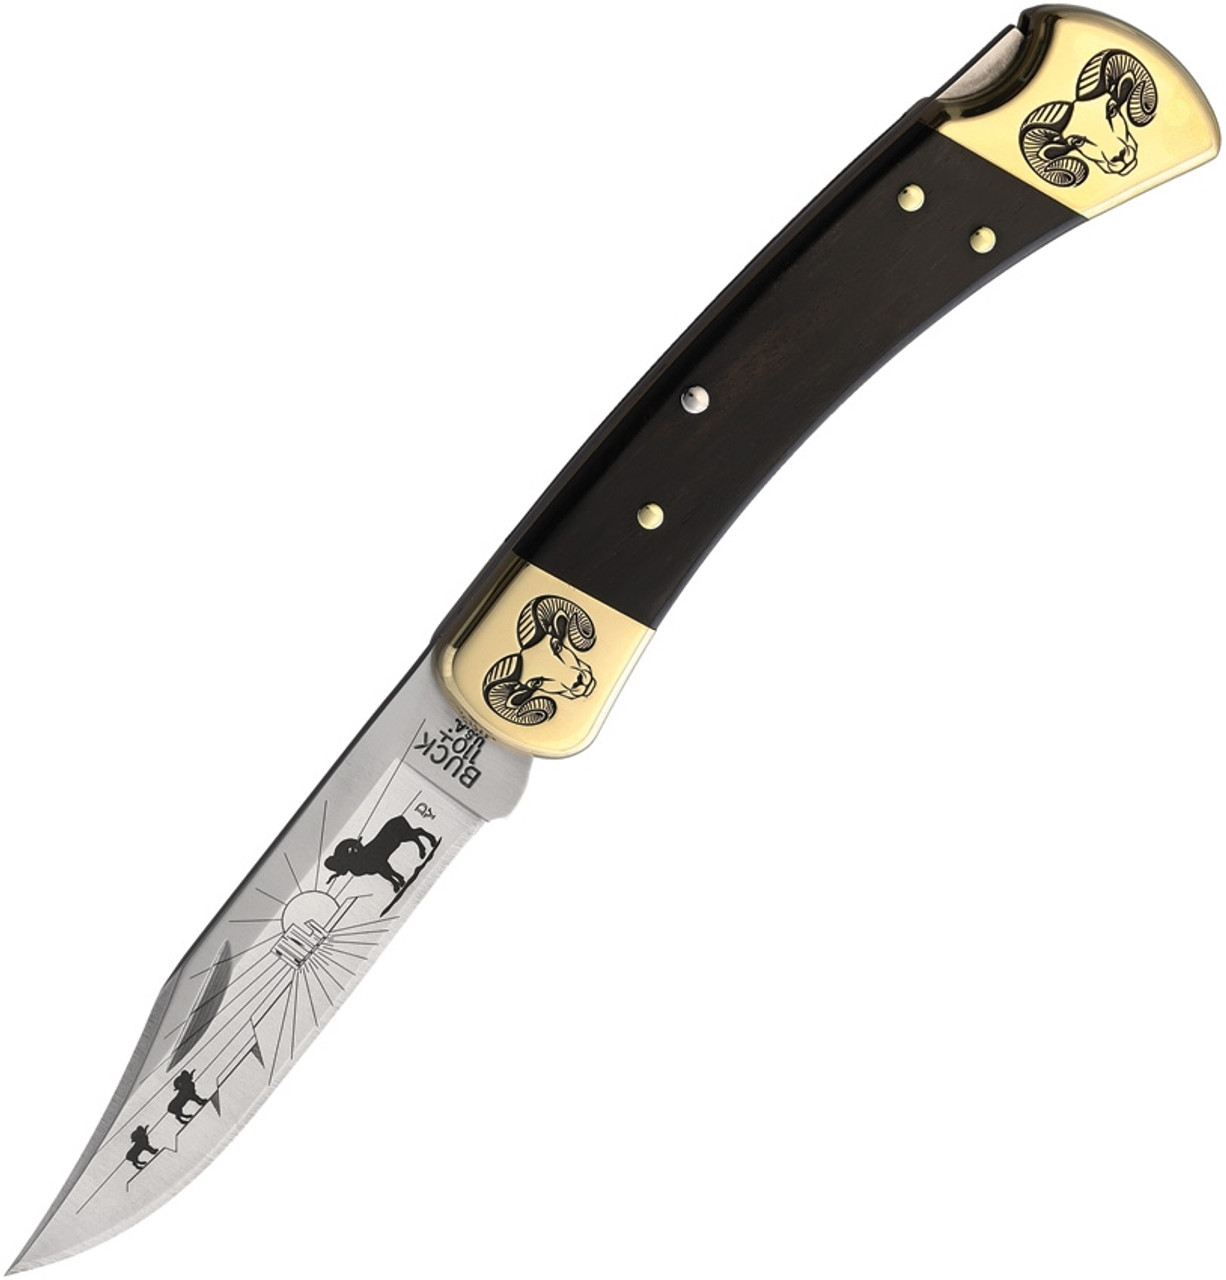 Brian Yellowhorse Custom Buck 110 Ram (YH377) 3.75" Satin 420HC Stainless Steel Clip Point Blade w/ Ram Etching, Ebony Wood Handle w/ Etched Brass Bolsters